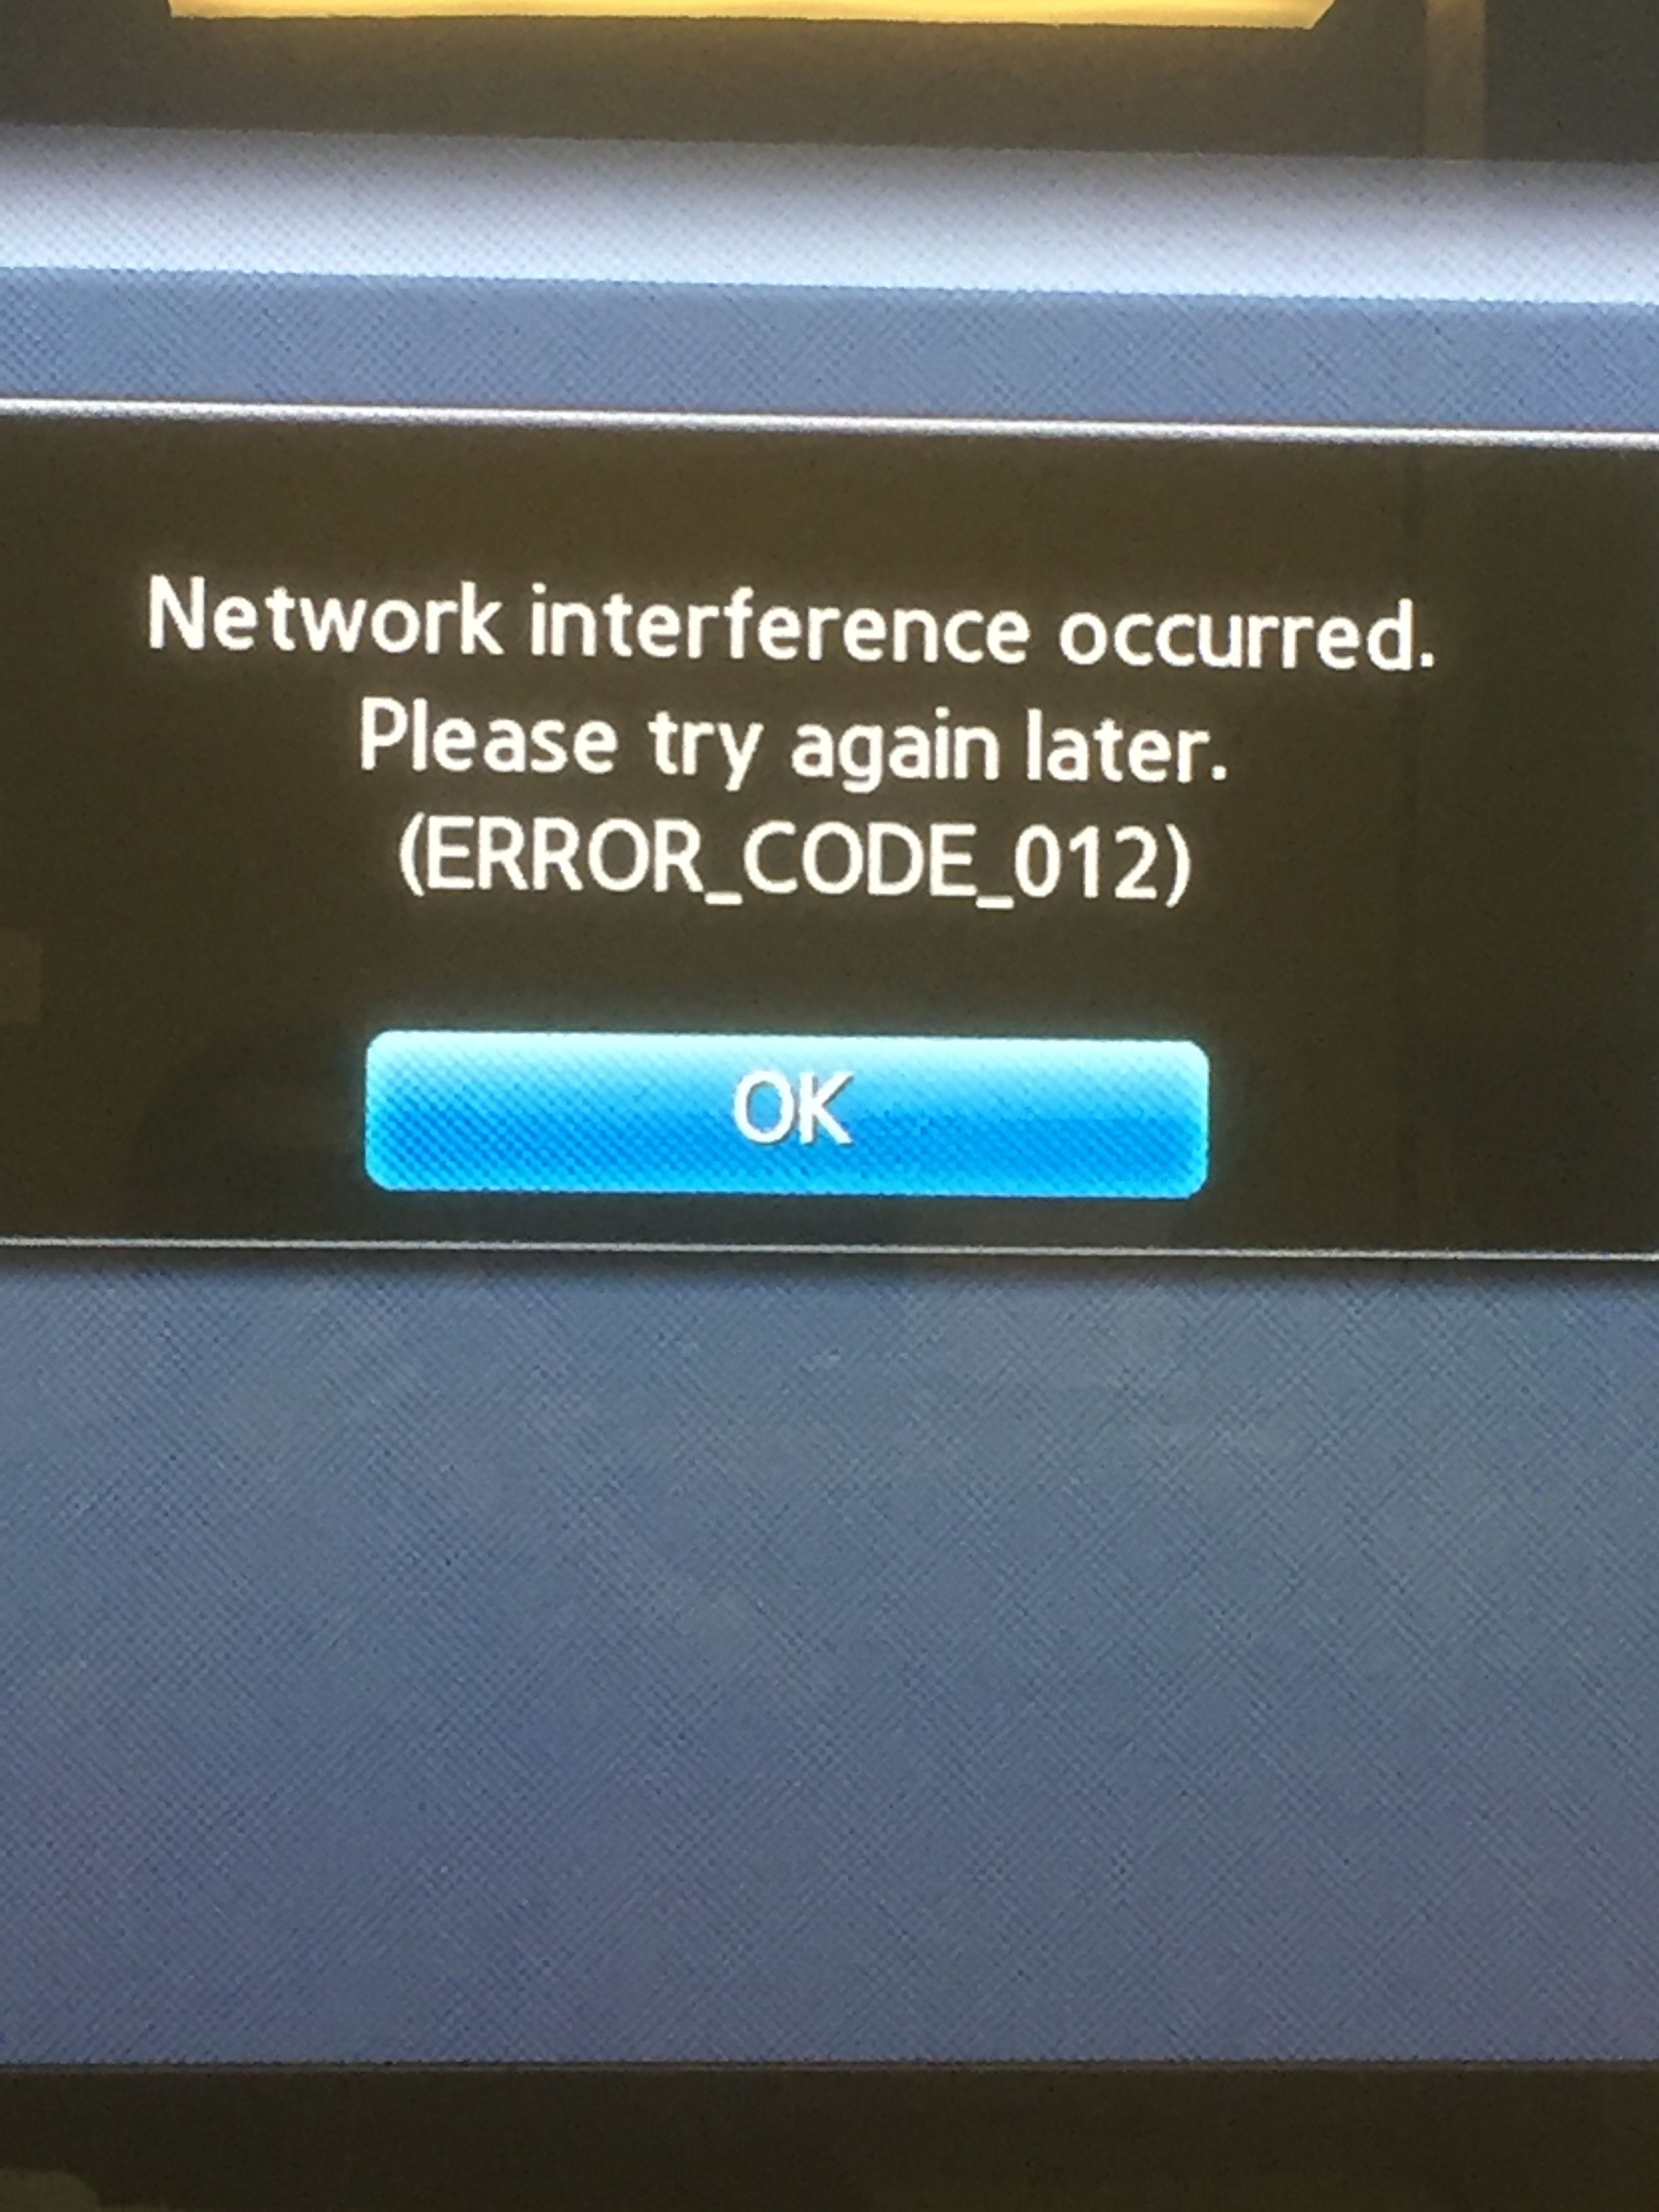 Solved: My smasung tv won't connect to the internet, Error_exe_001 and  Error_model_bind, tough the network status is fine - Samsung Community